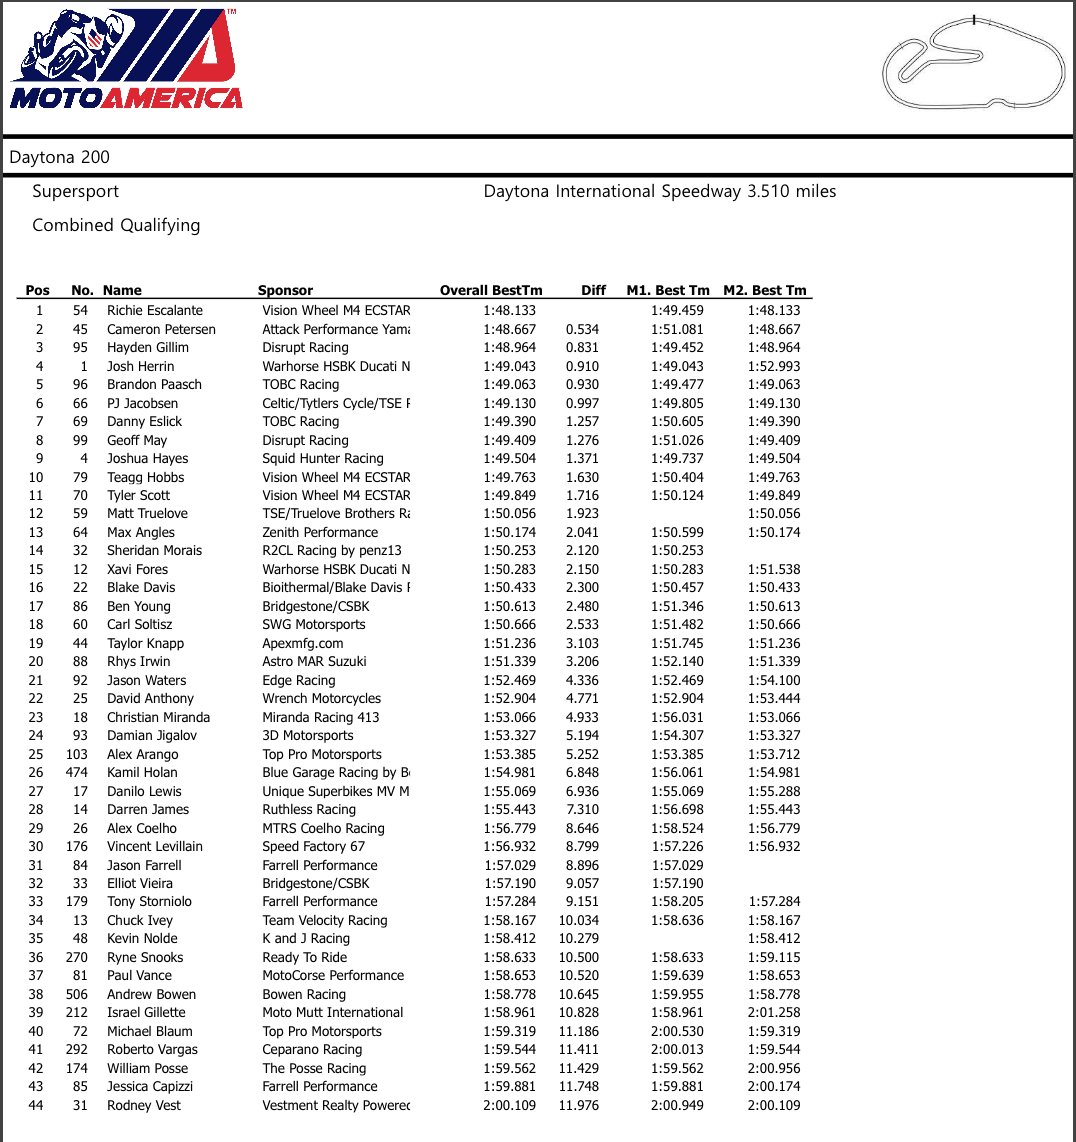 . @VisionWheelInc M4 ECSTAR Suzuki rider @EscalanteRichie is fastest in final qualifying for the @DAYTONA 200. This afternoon's Time Attack will set the final grid for tomorrow's race.